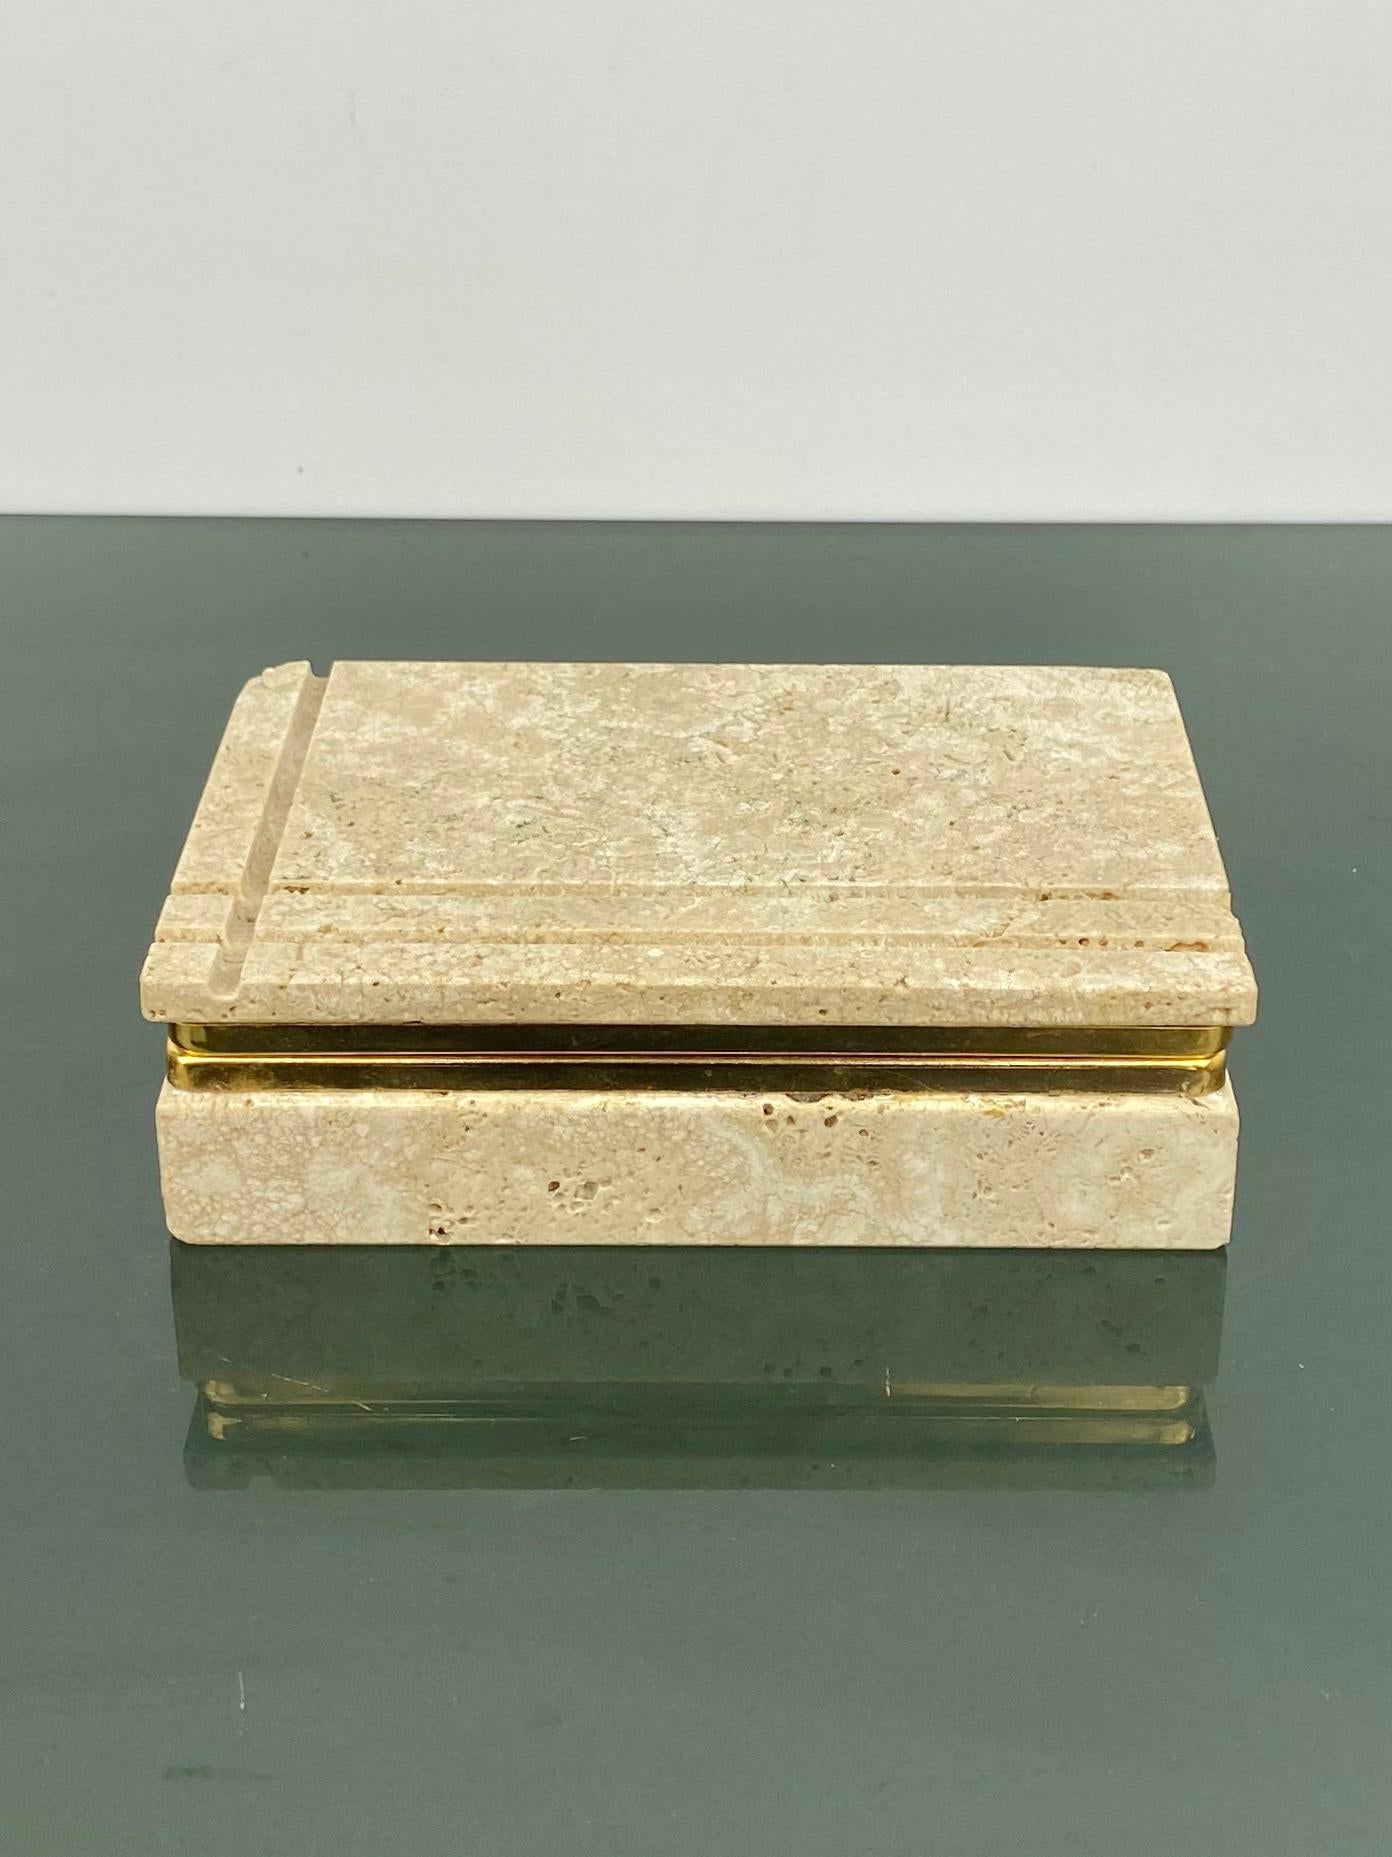 Rectangular travertine box the in style of the Italian designer house Fratelli Mannelli. 
Made in Italy circa 1970.